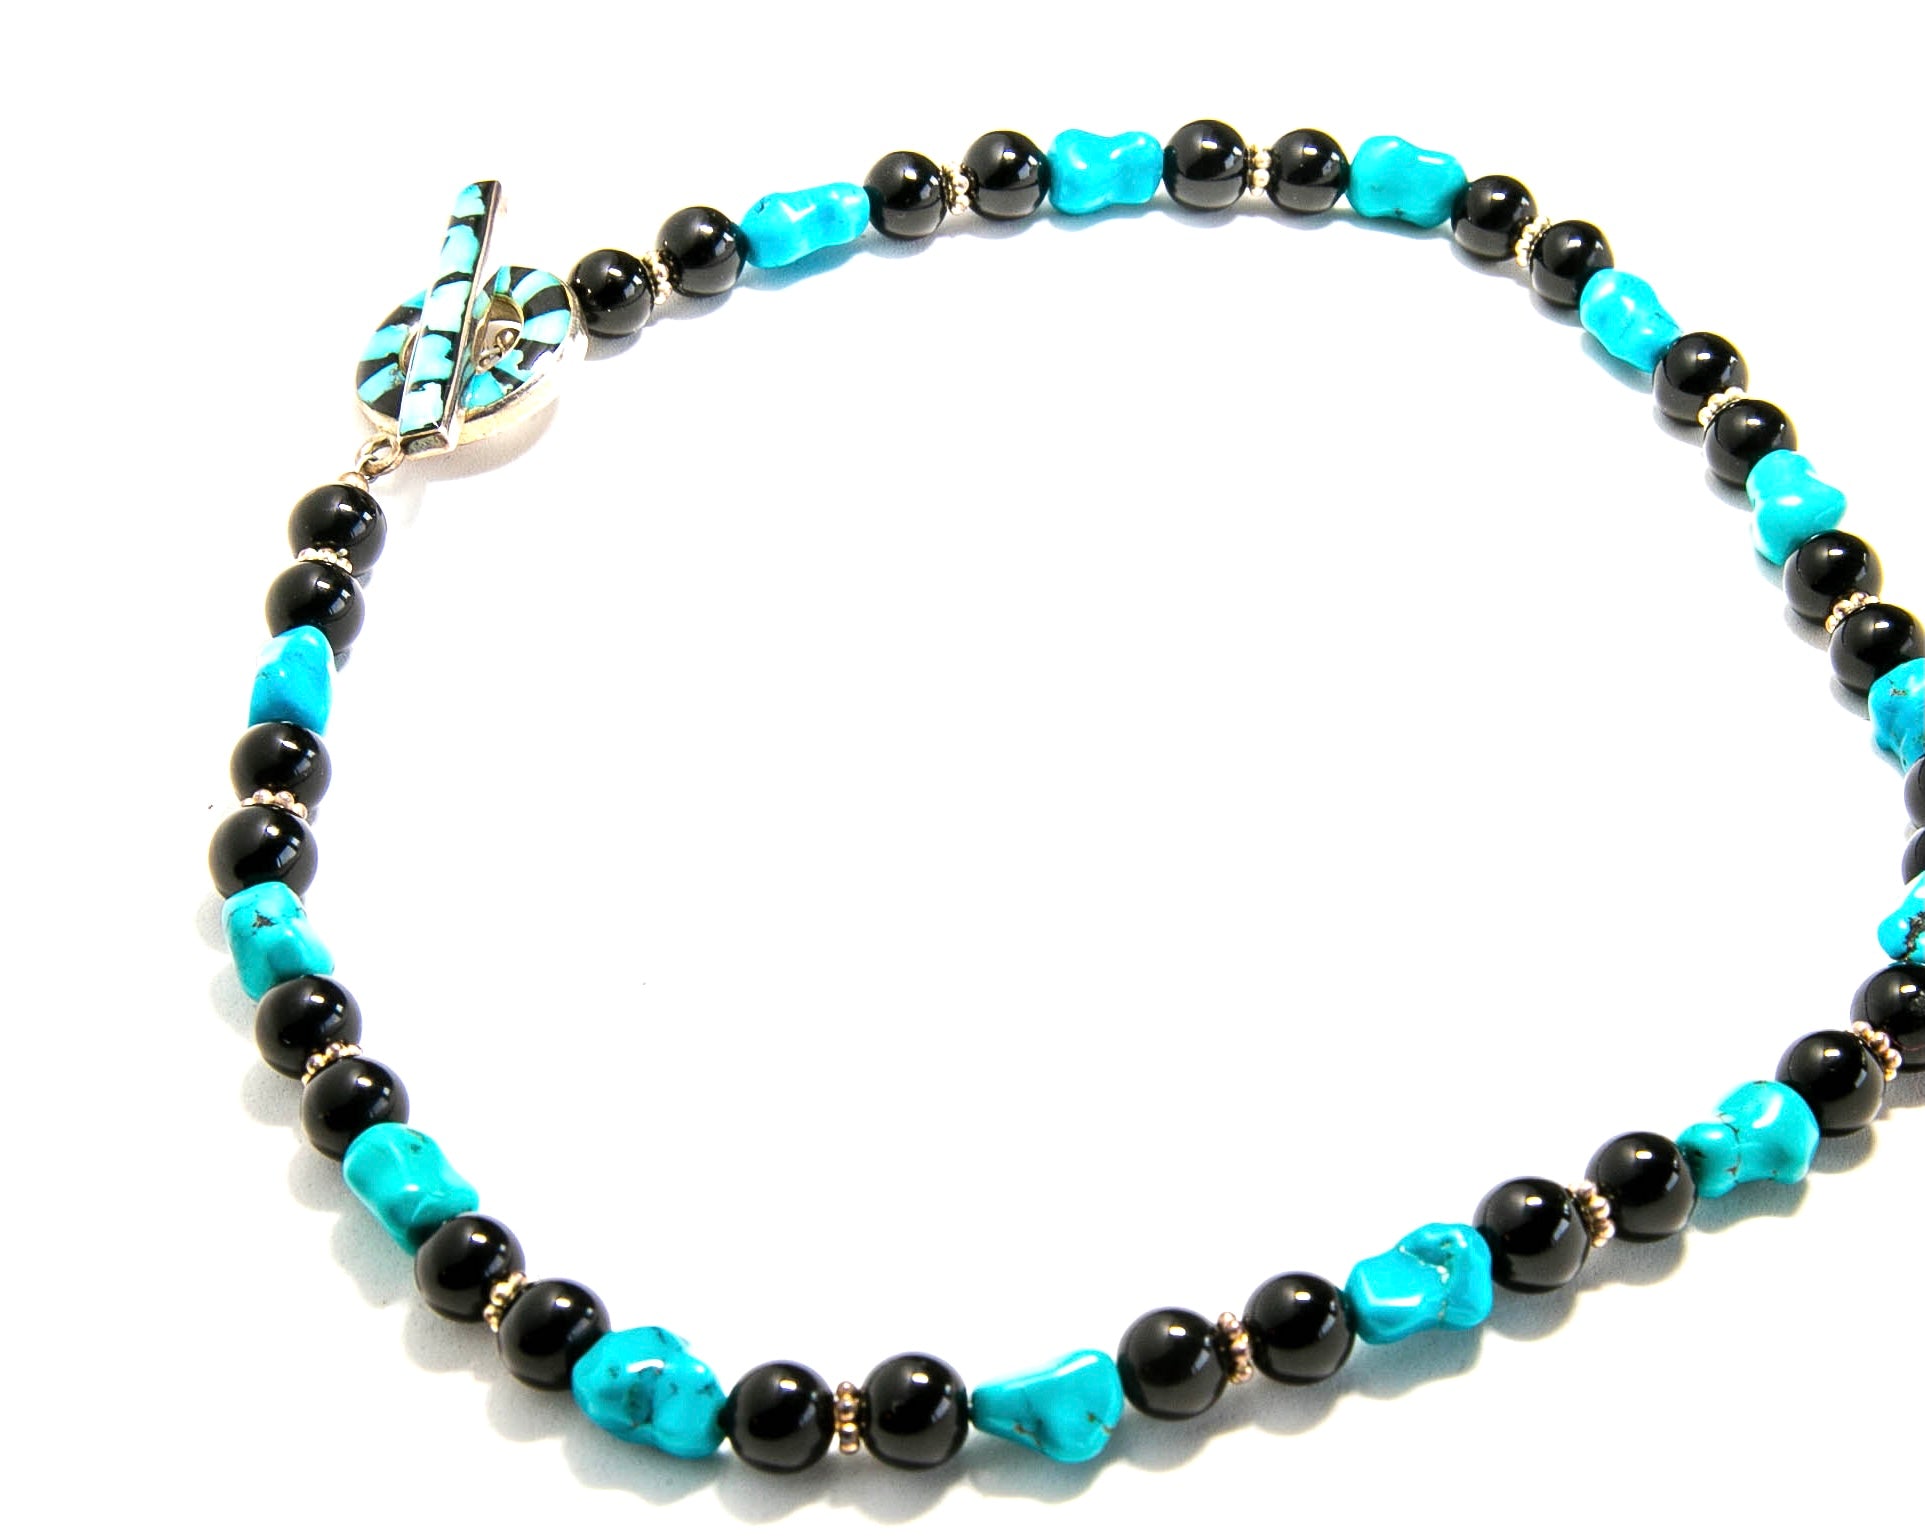 Turquoise and Onyx necklace with inlaid clasp.